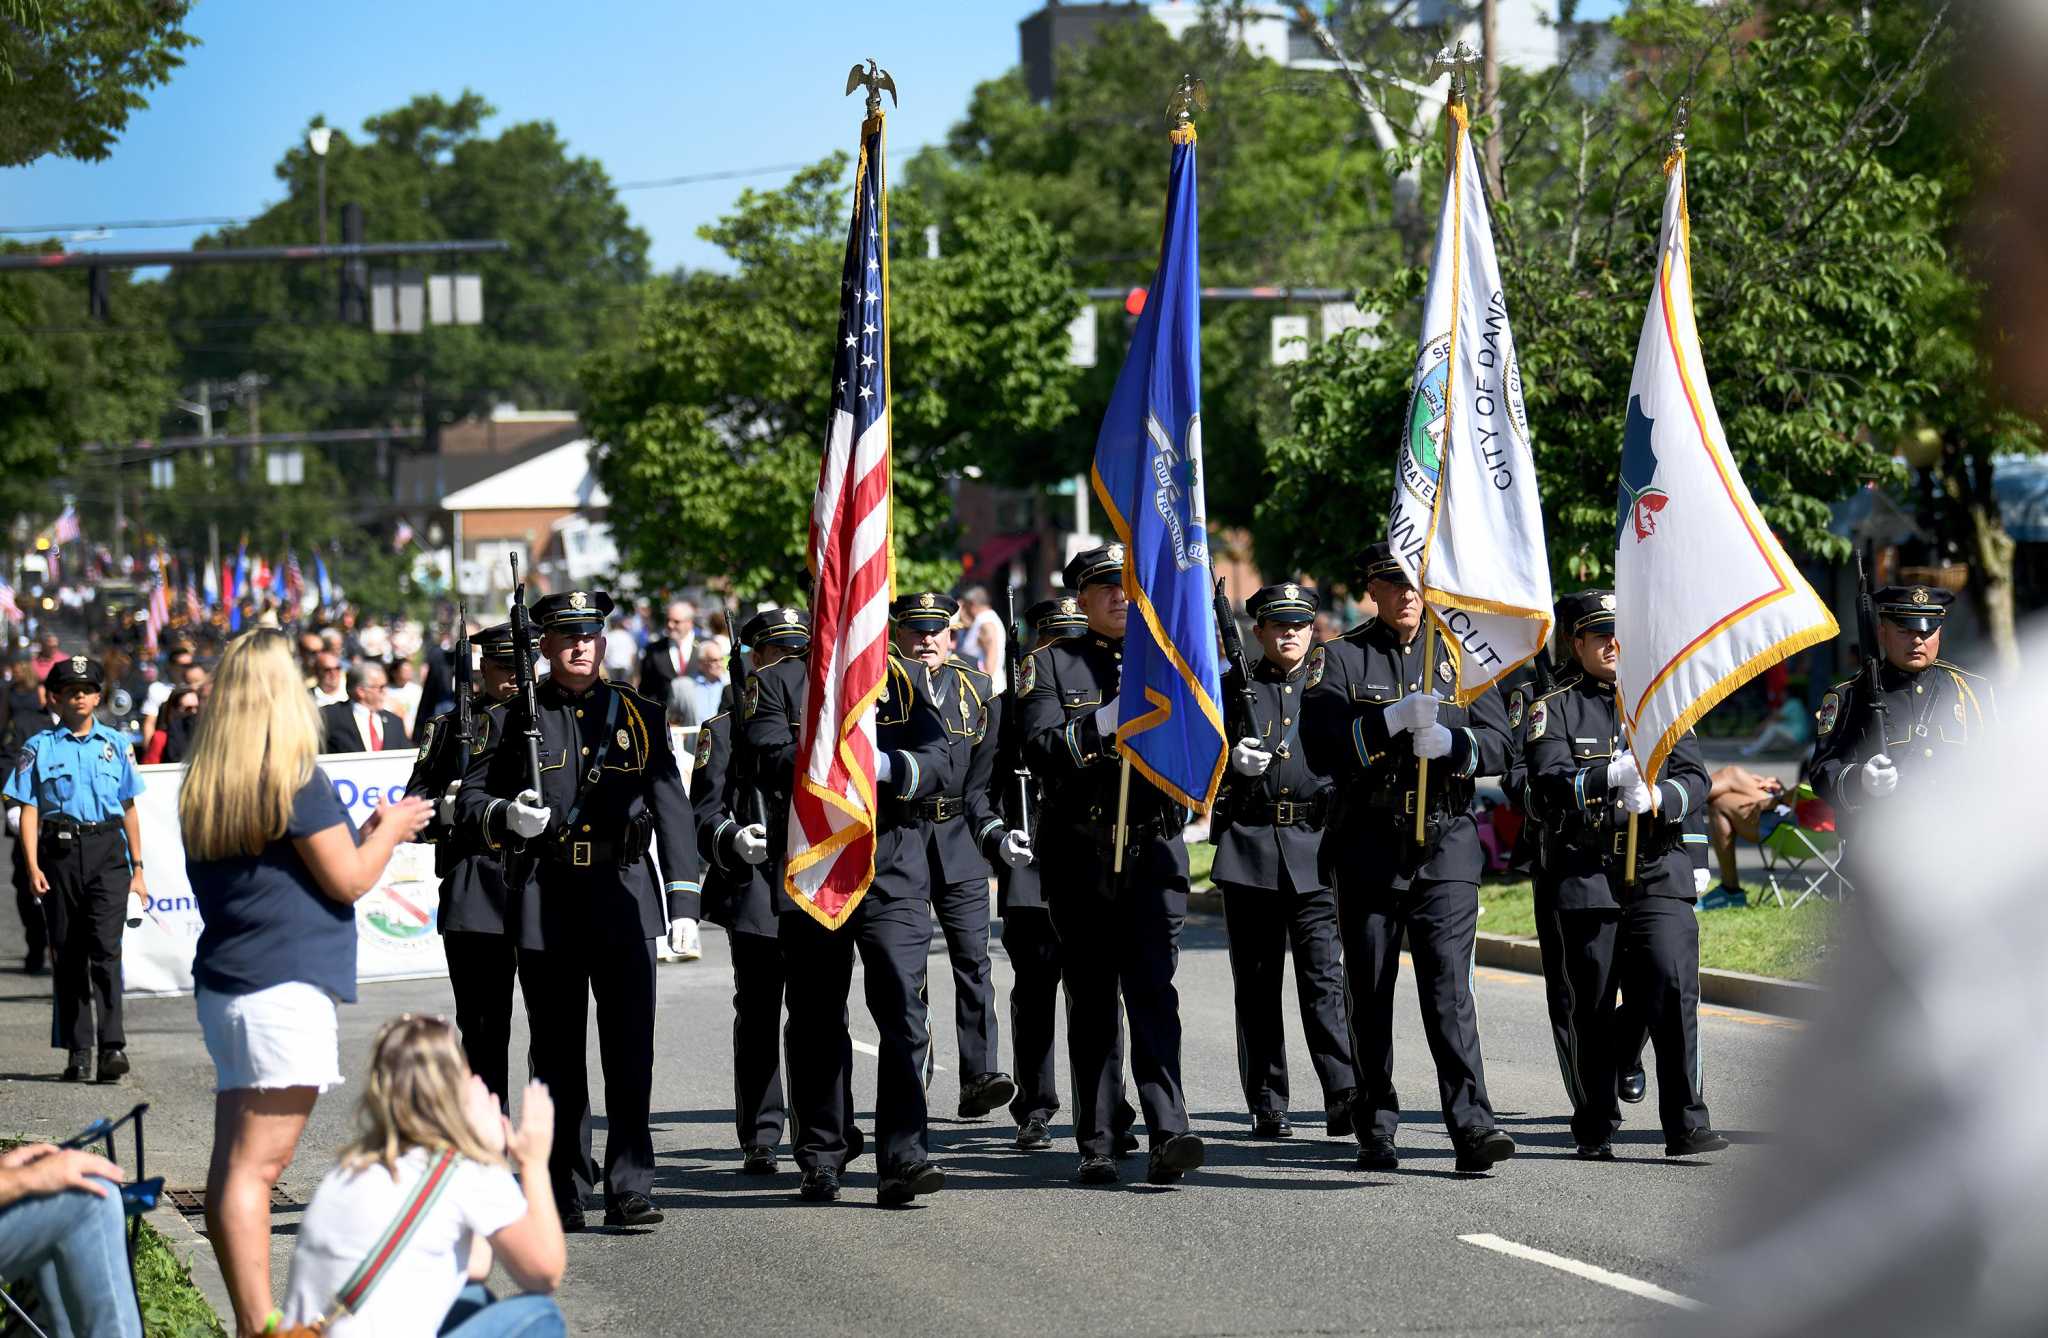 Danbury area to honor 'true meaning of Memorial Day' with parades